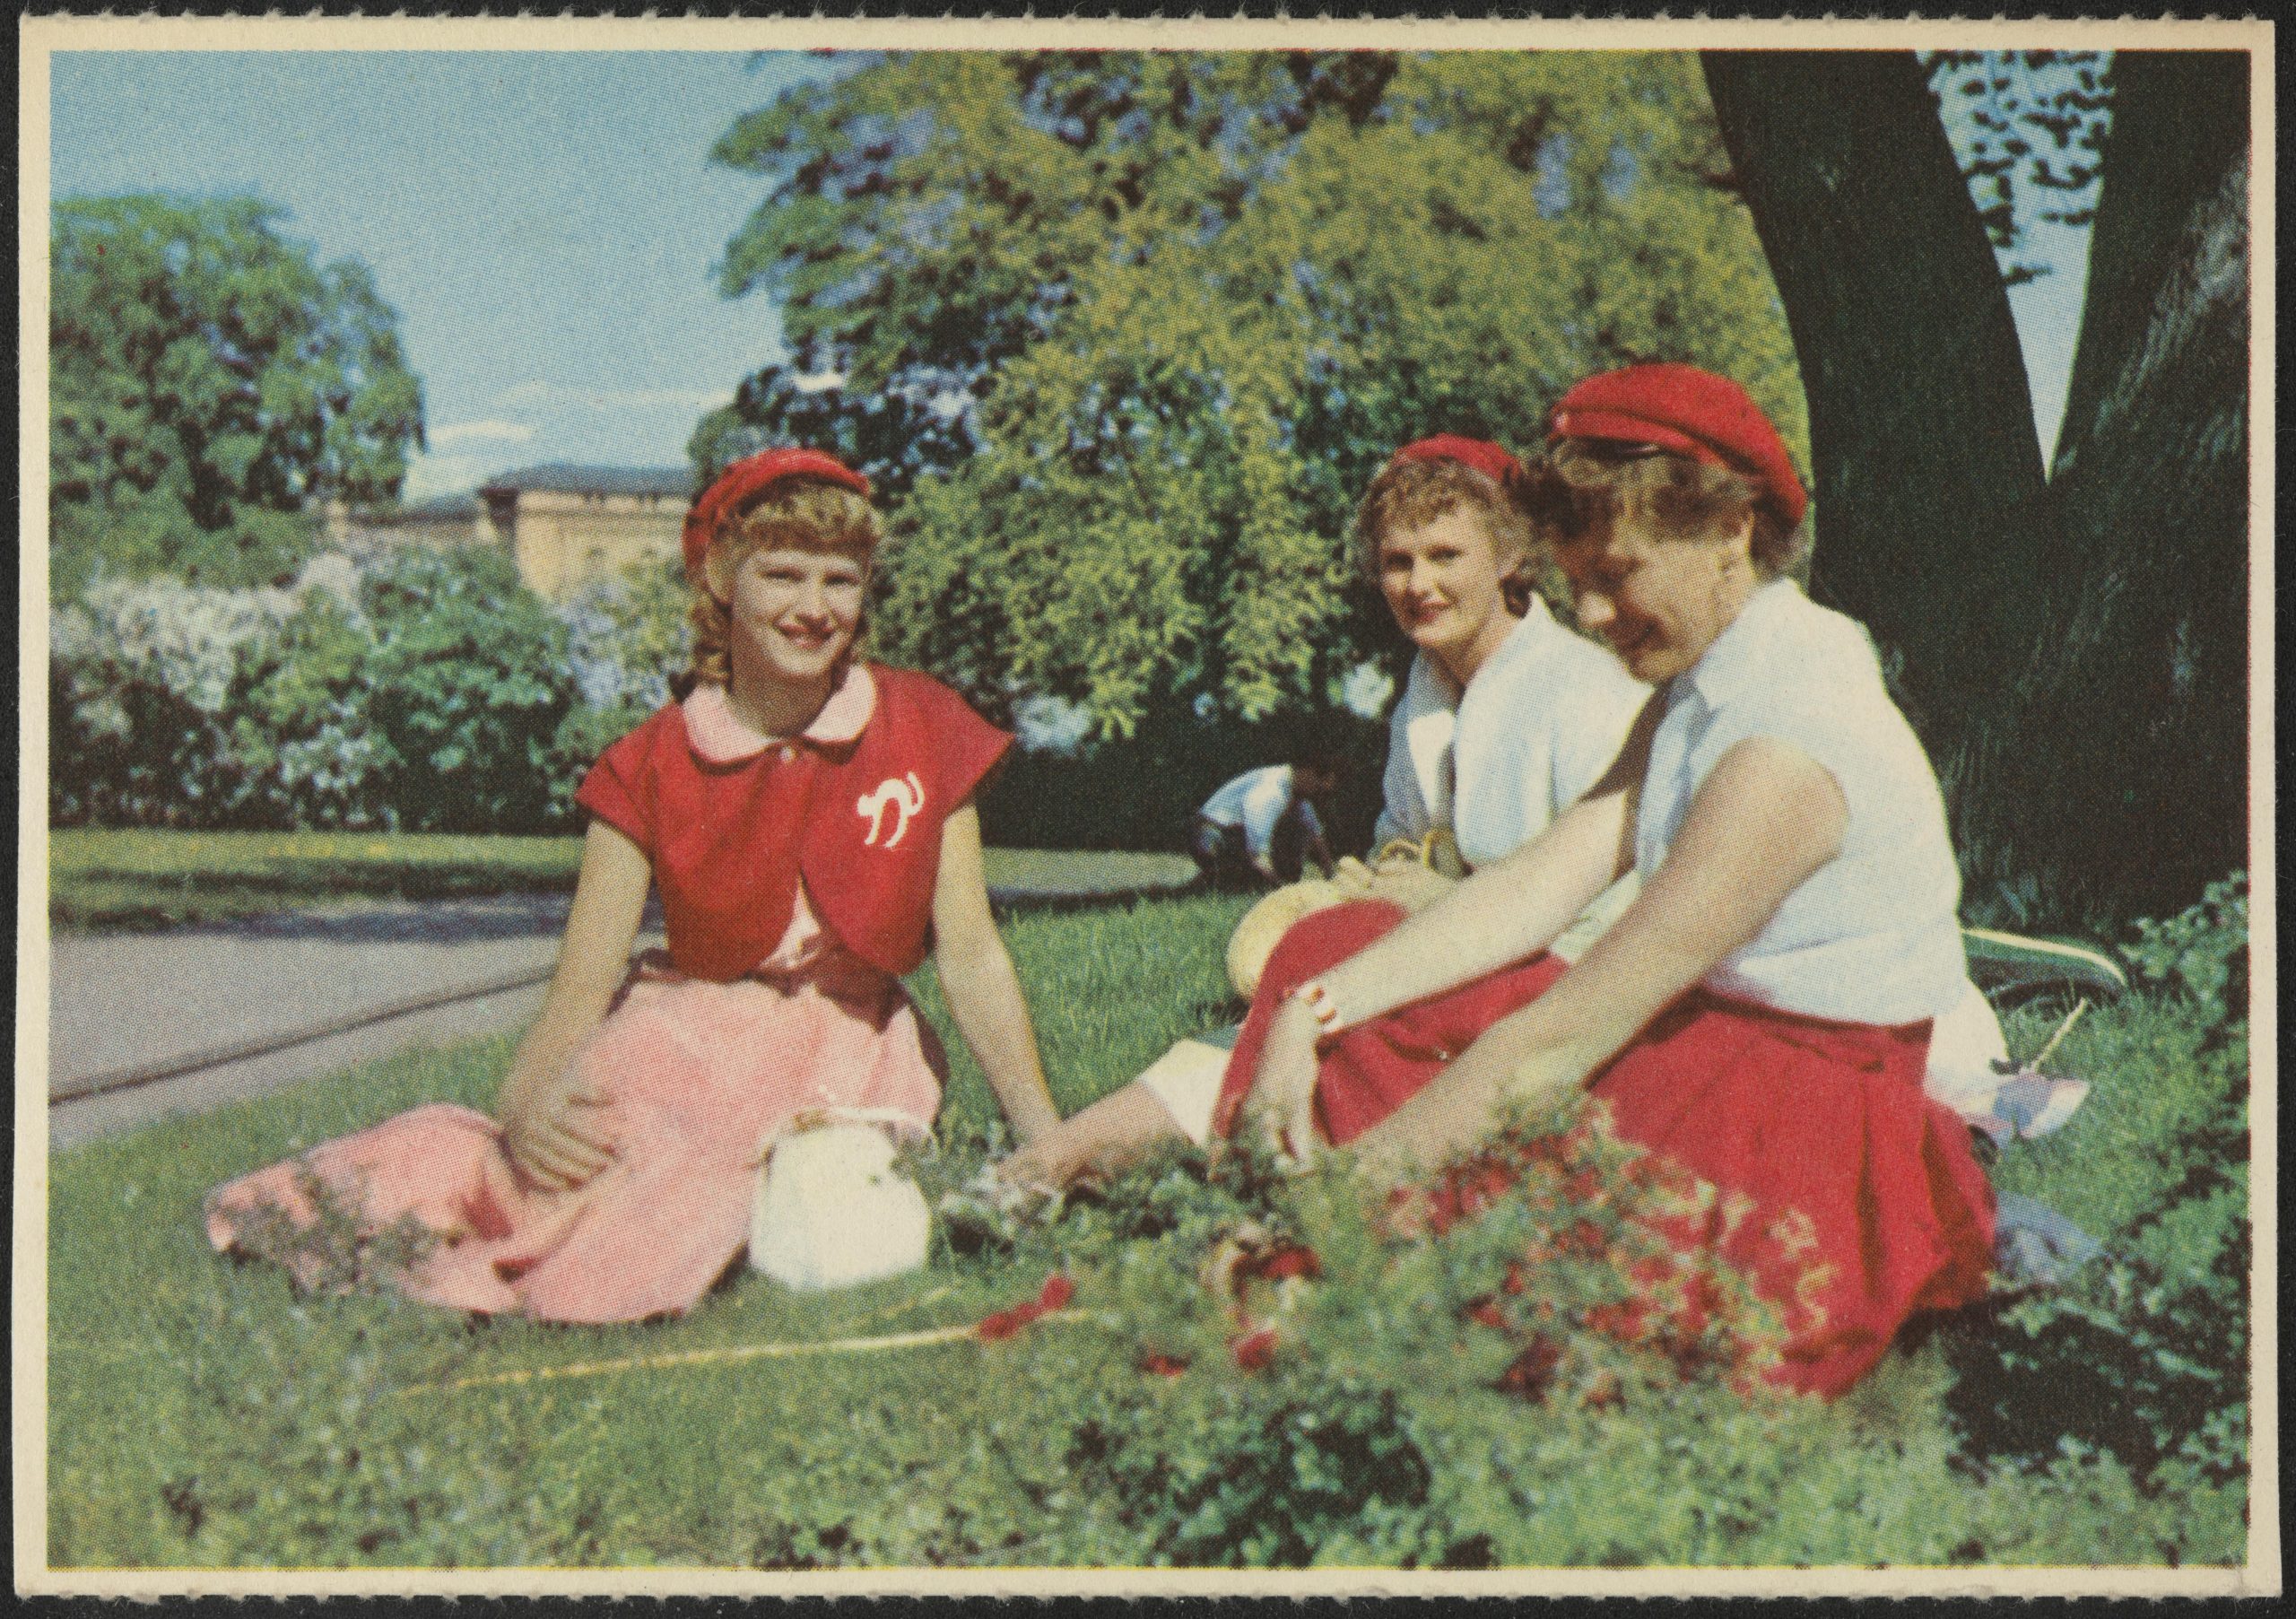 An image of three girls sitting in a park, on the grass. They are wearing red "russ hats" (russeluer). They are also wearing red skirts or red shirts, with the poodle-style skirts dating the picture to around the 1950's.